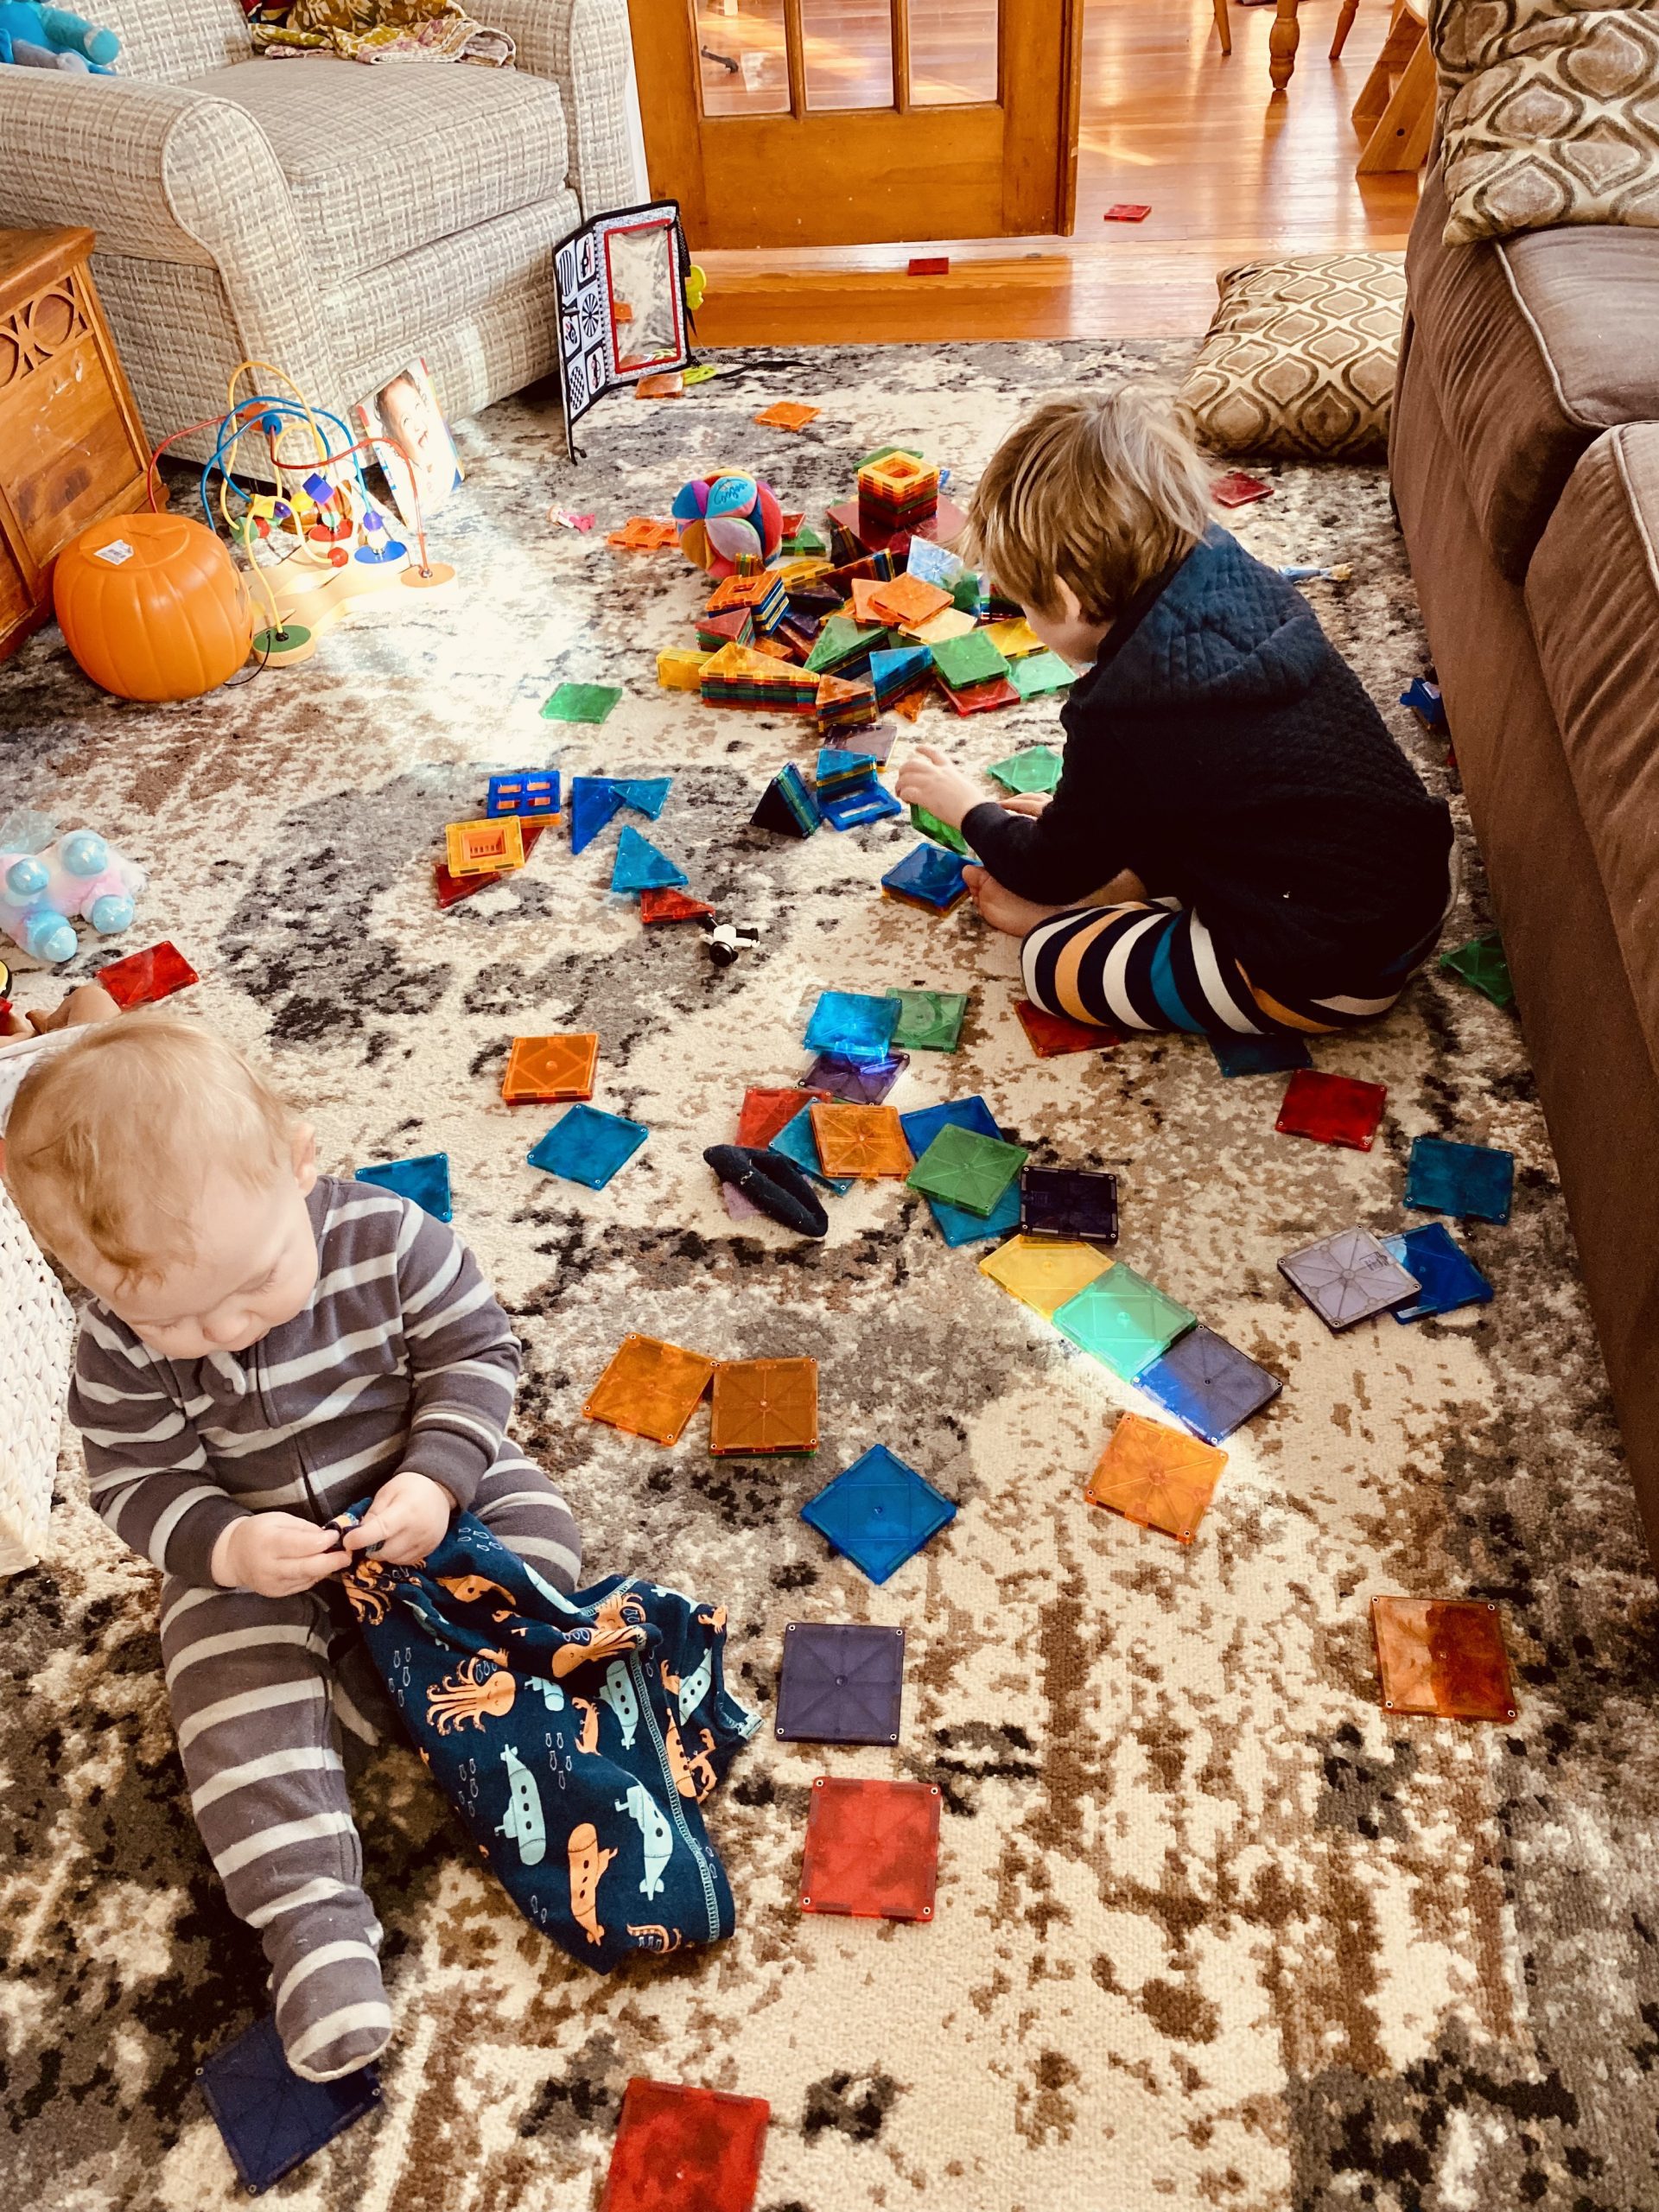 Two kids play on the floor surrounded by a mess of magnetic building tiles